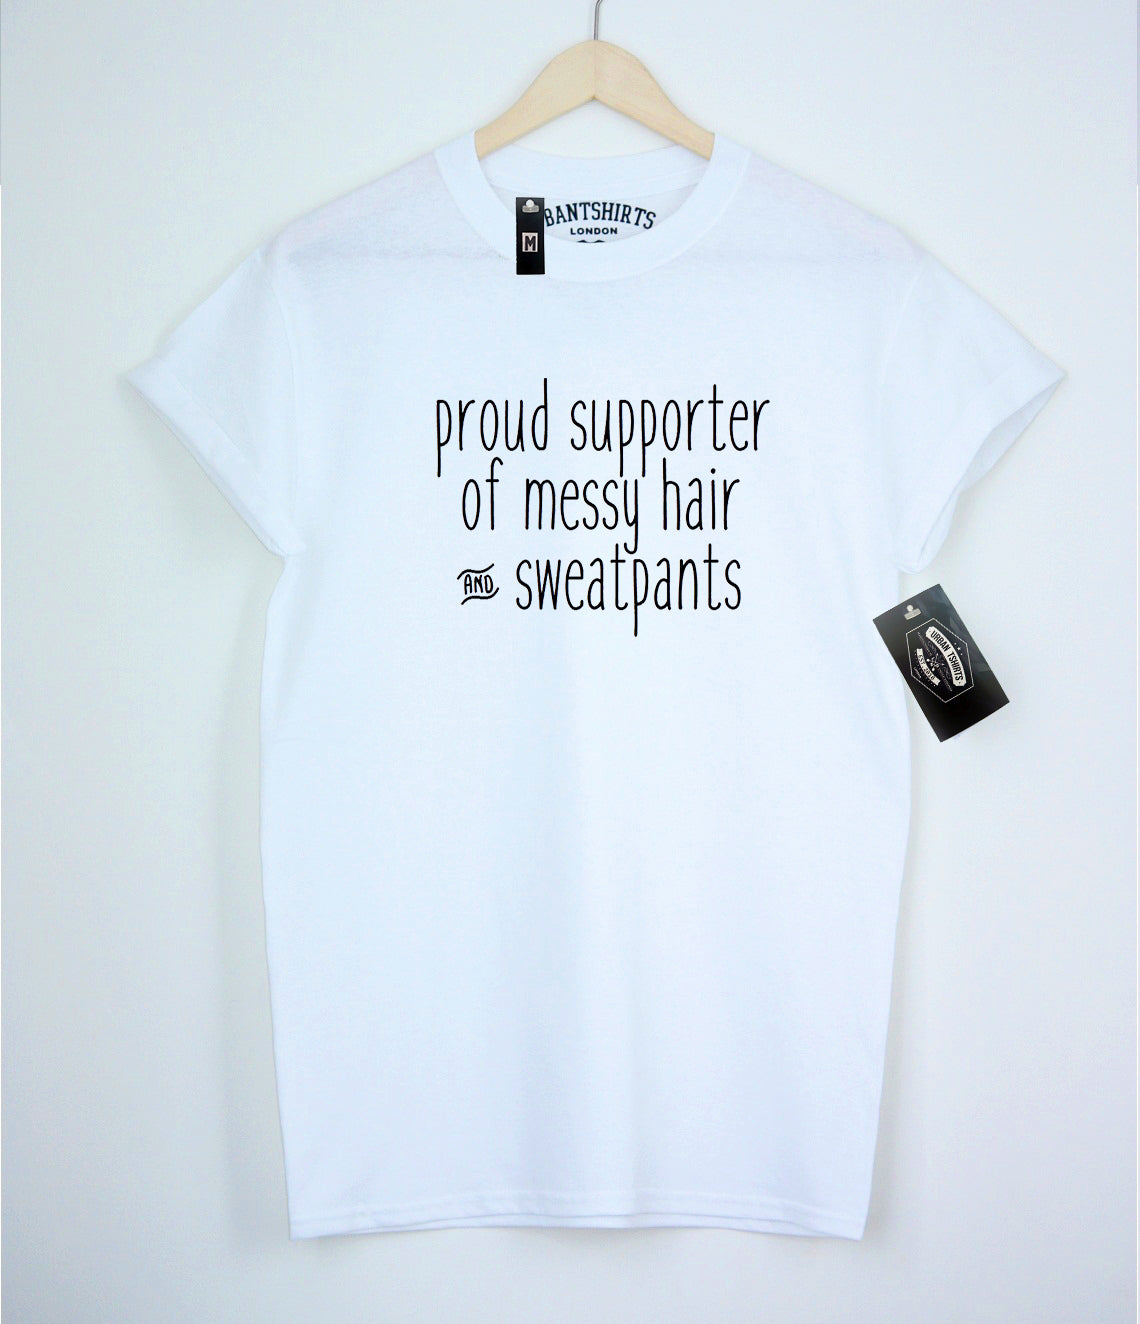 Proud supporter of messy hair and sweatpants T-shirt - Urbantshirts.co.uk